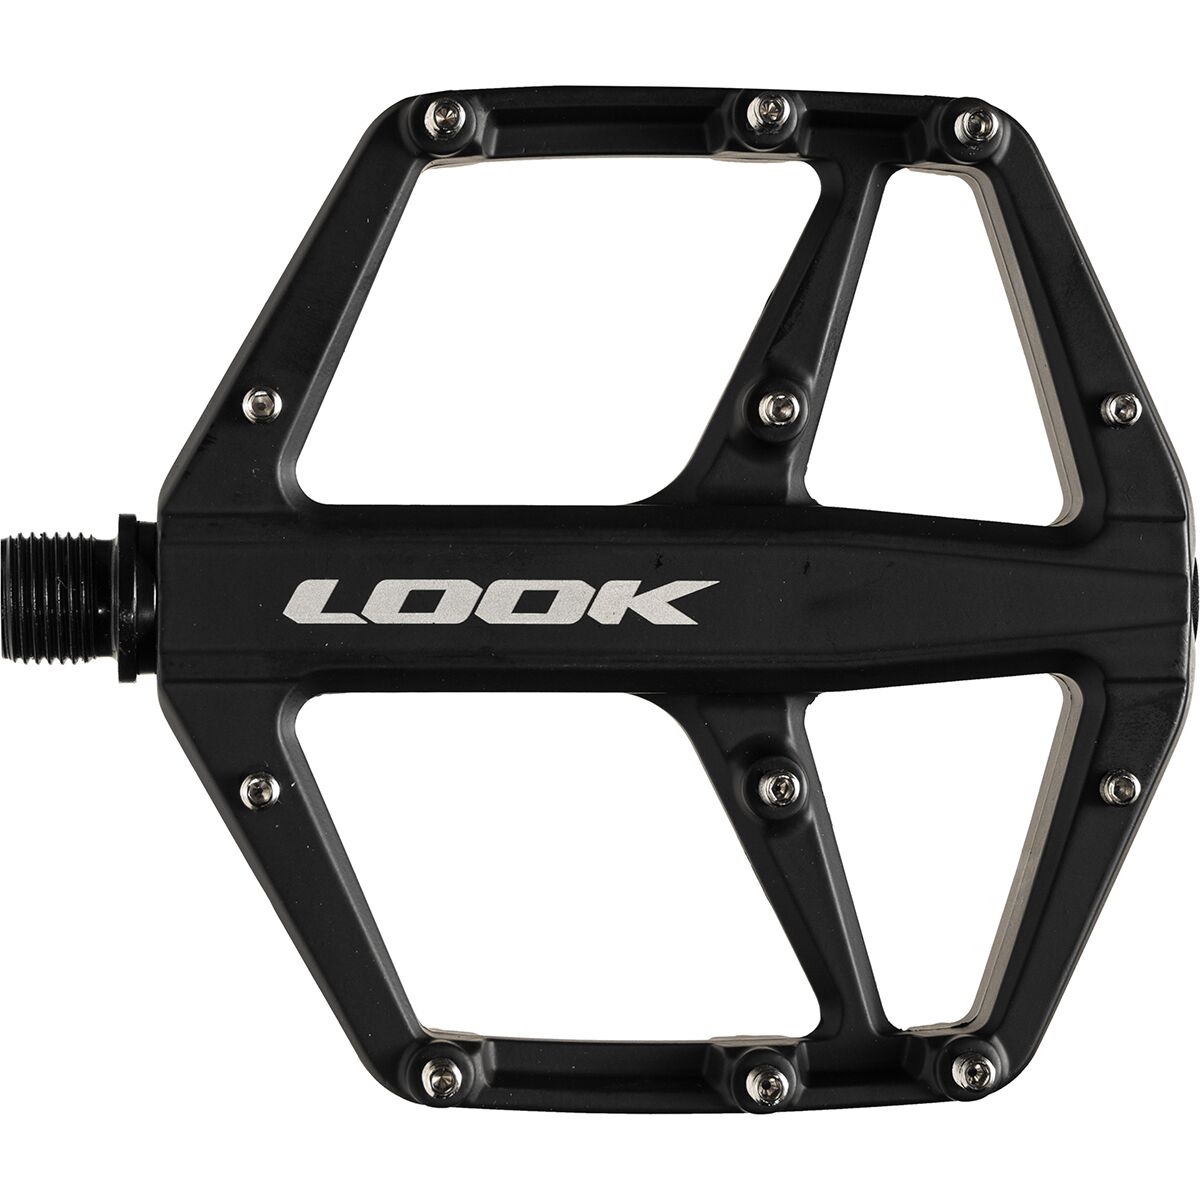 Педаль trail roc Look Cycle, черный 105 pd r7000 pd5800 r540 r550 road bike pedals carbon self locking pedals spd pedals with sm sh11 cleats